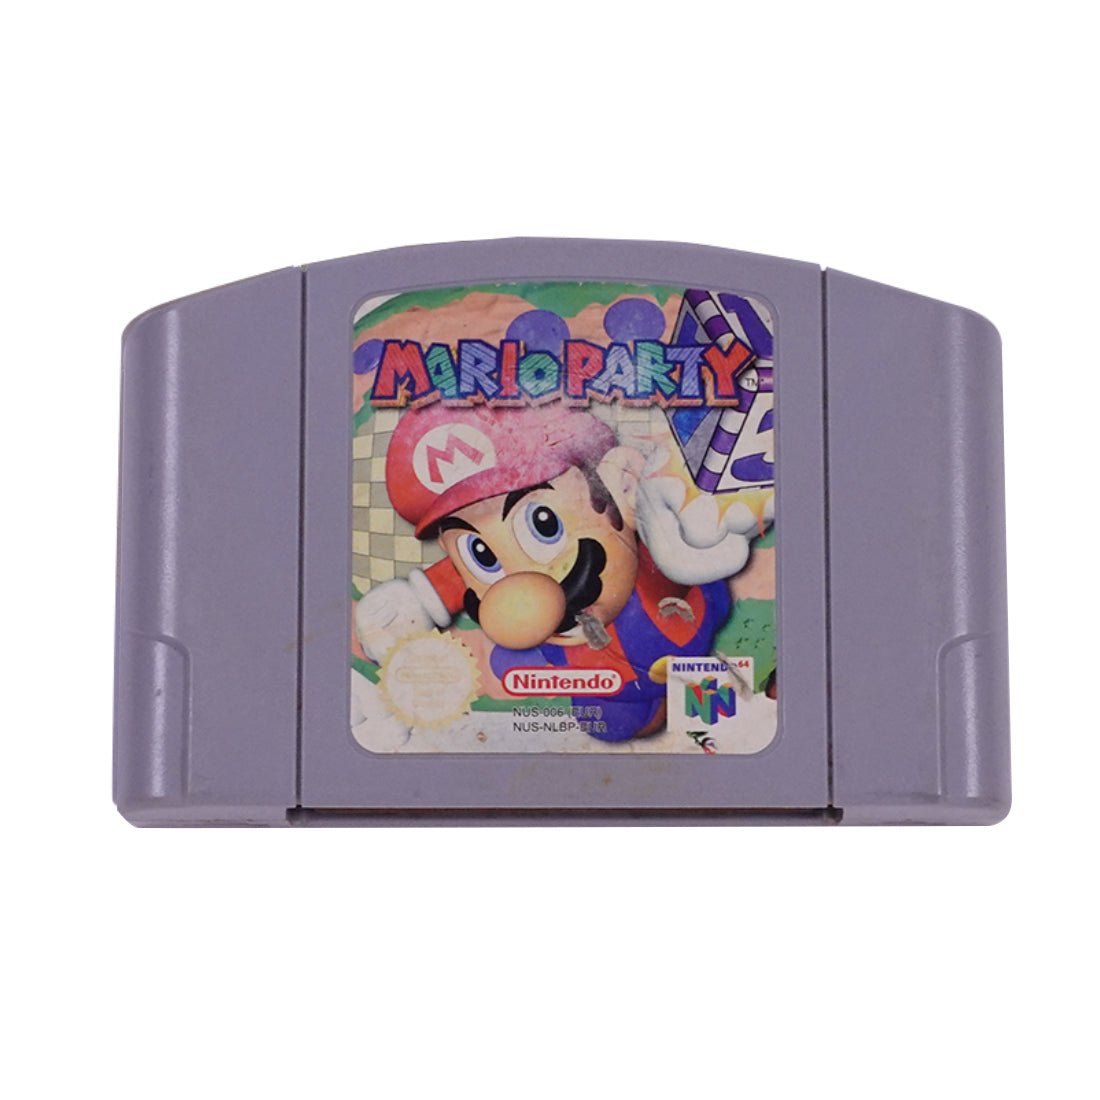 (Pre-Owned) Mario Party - Nintendo 64 - Store 974 | ستور ٩٧٤